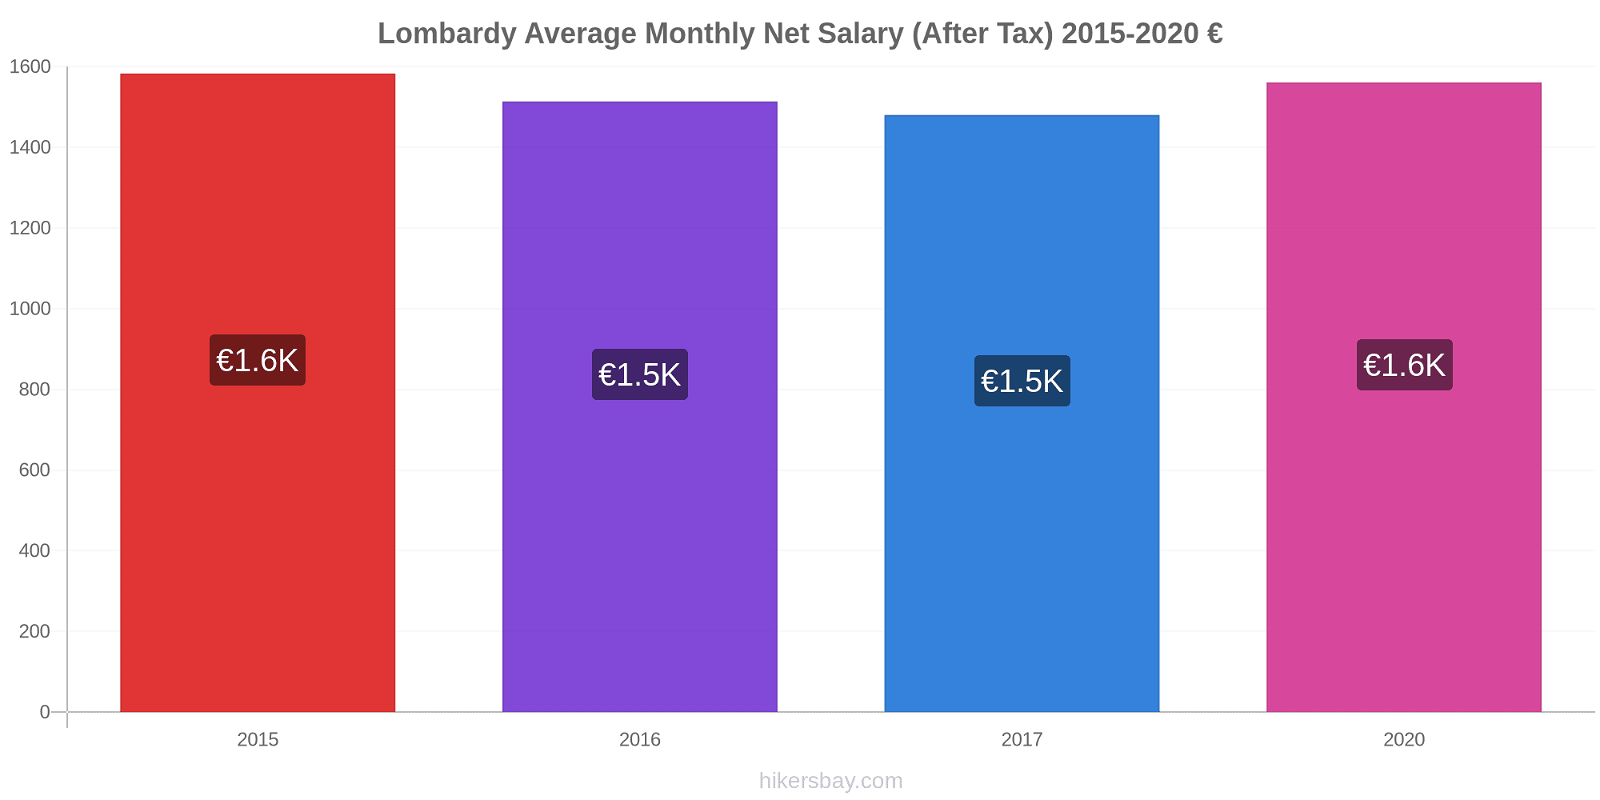 Lombardy price changes Average Monthly Net Salary (After Tax) hikersbay.com